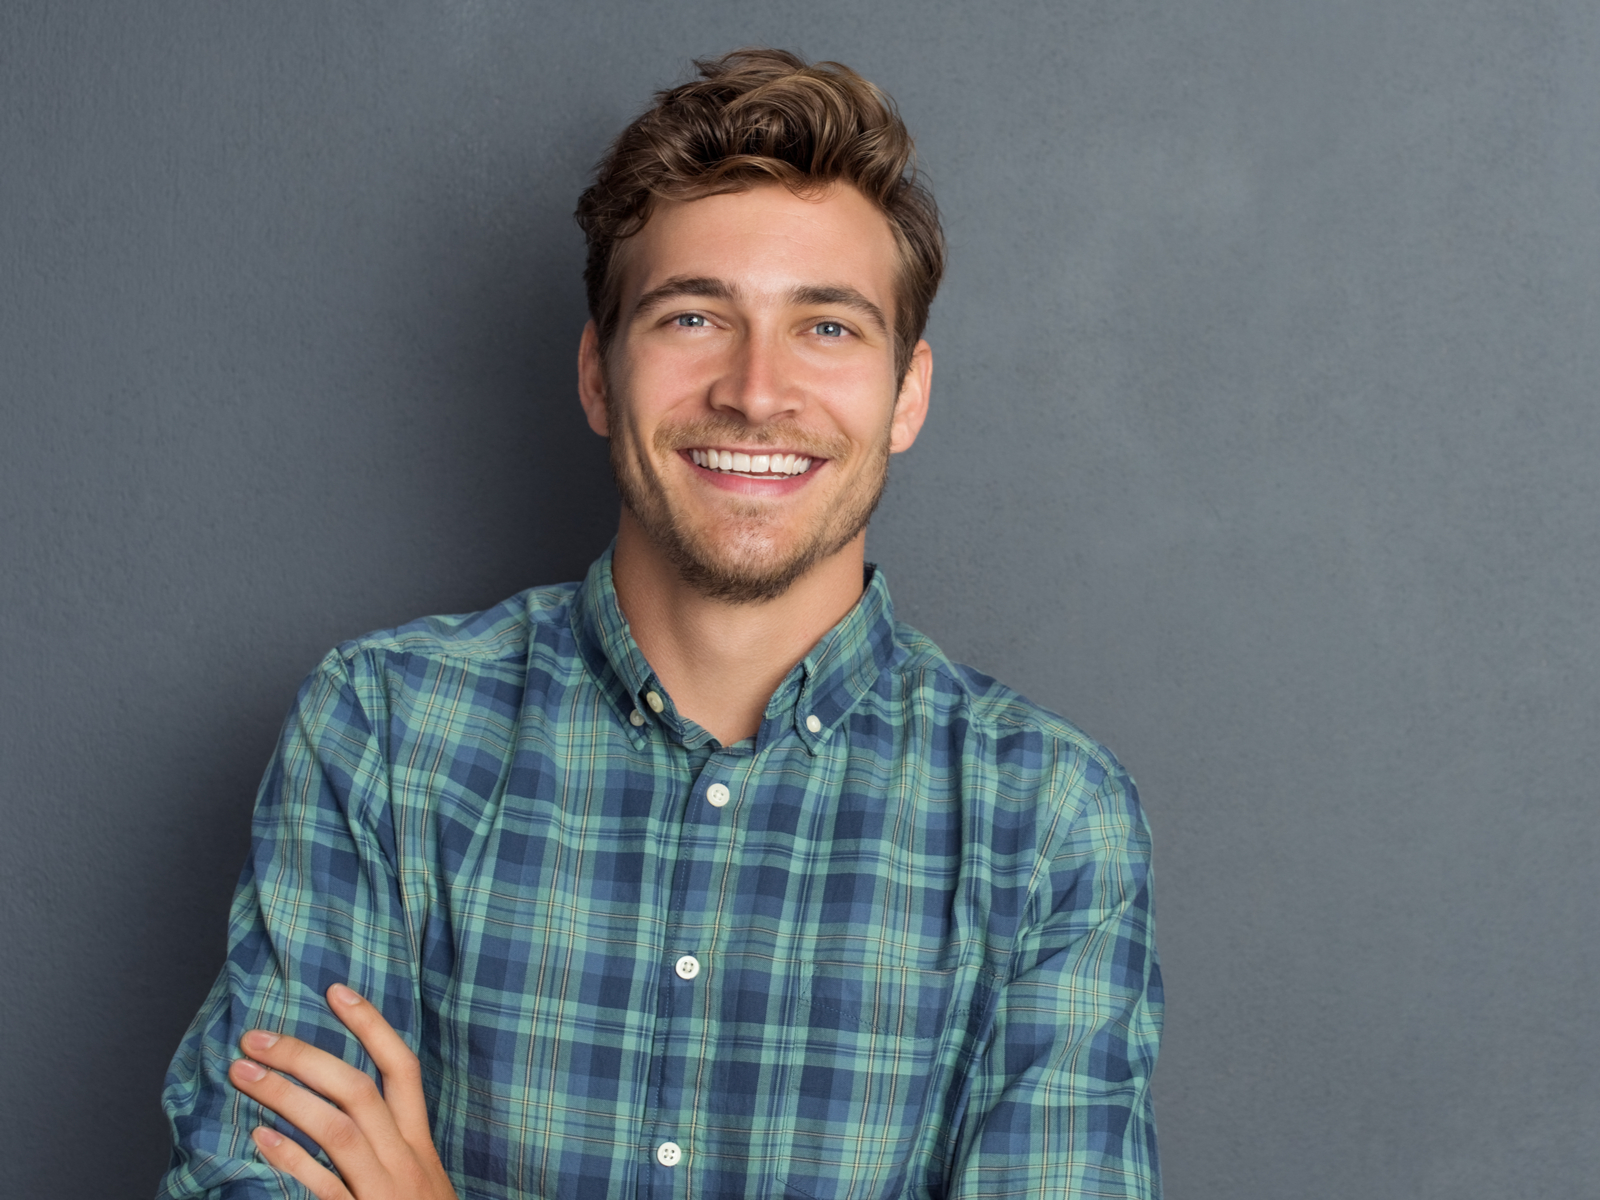 Medium Chocolate Brown hair color idea for men on a guy in a plaid shirt